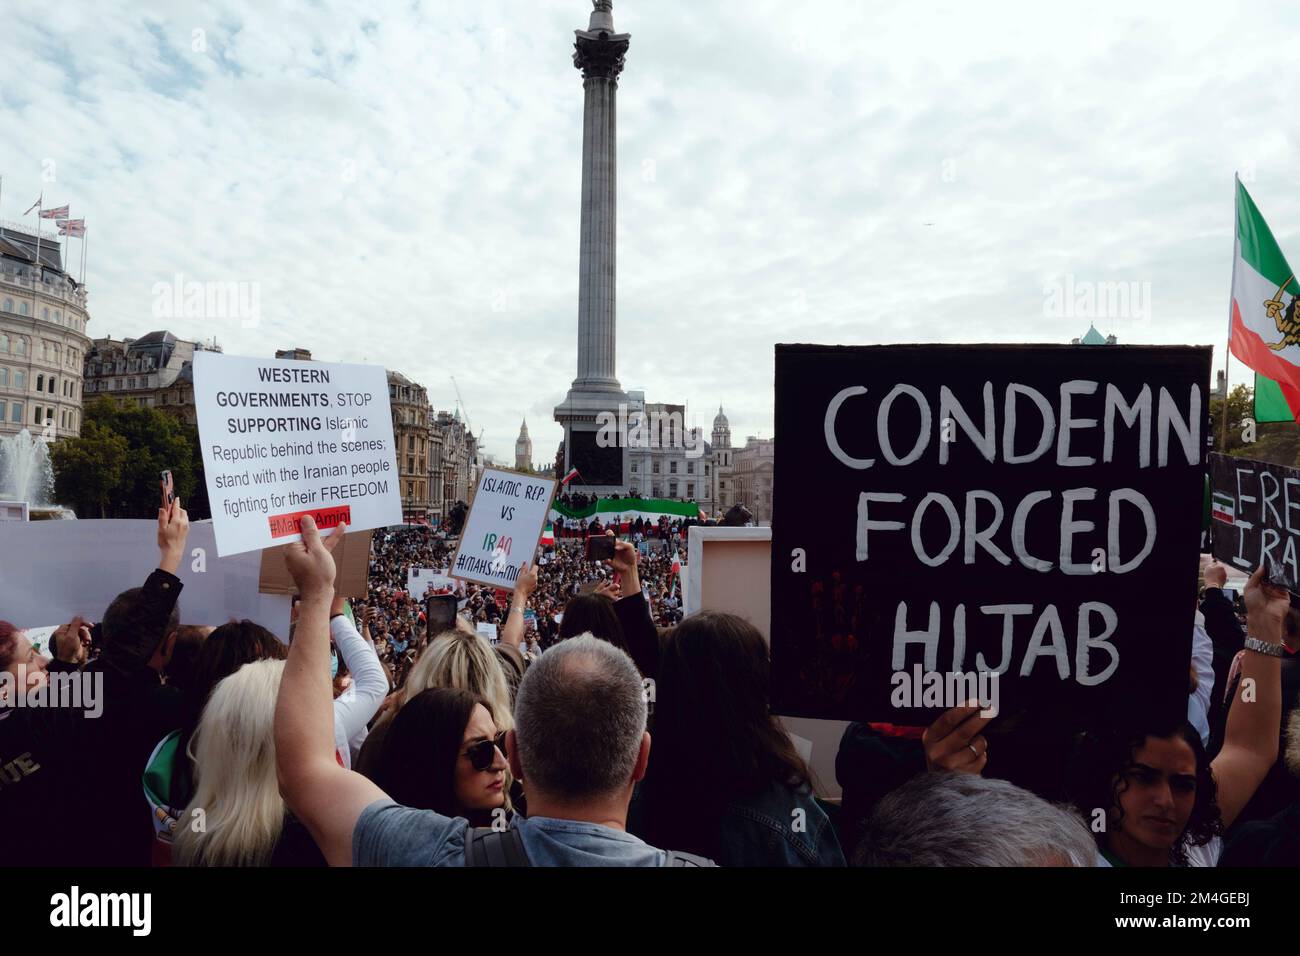 London, UK. 1 OCT, 2022. Iranian people and supporters gathered in Trafalgar Square to protest Iran's regime over the death of Mahsa Amini, who died in police custody in Iran after being detained for allegedly not wearing a head scarf (hijab). Stock Photo